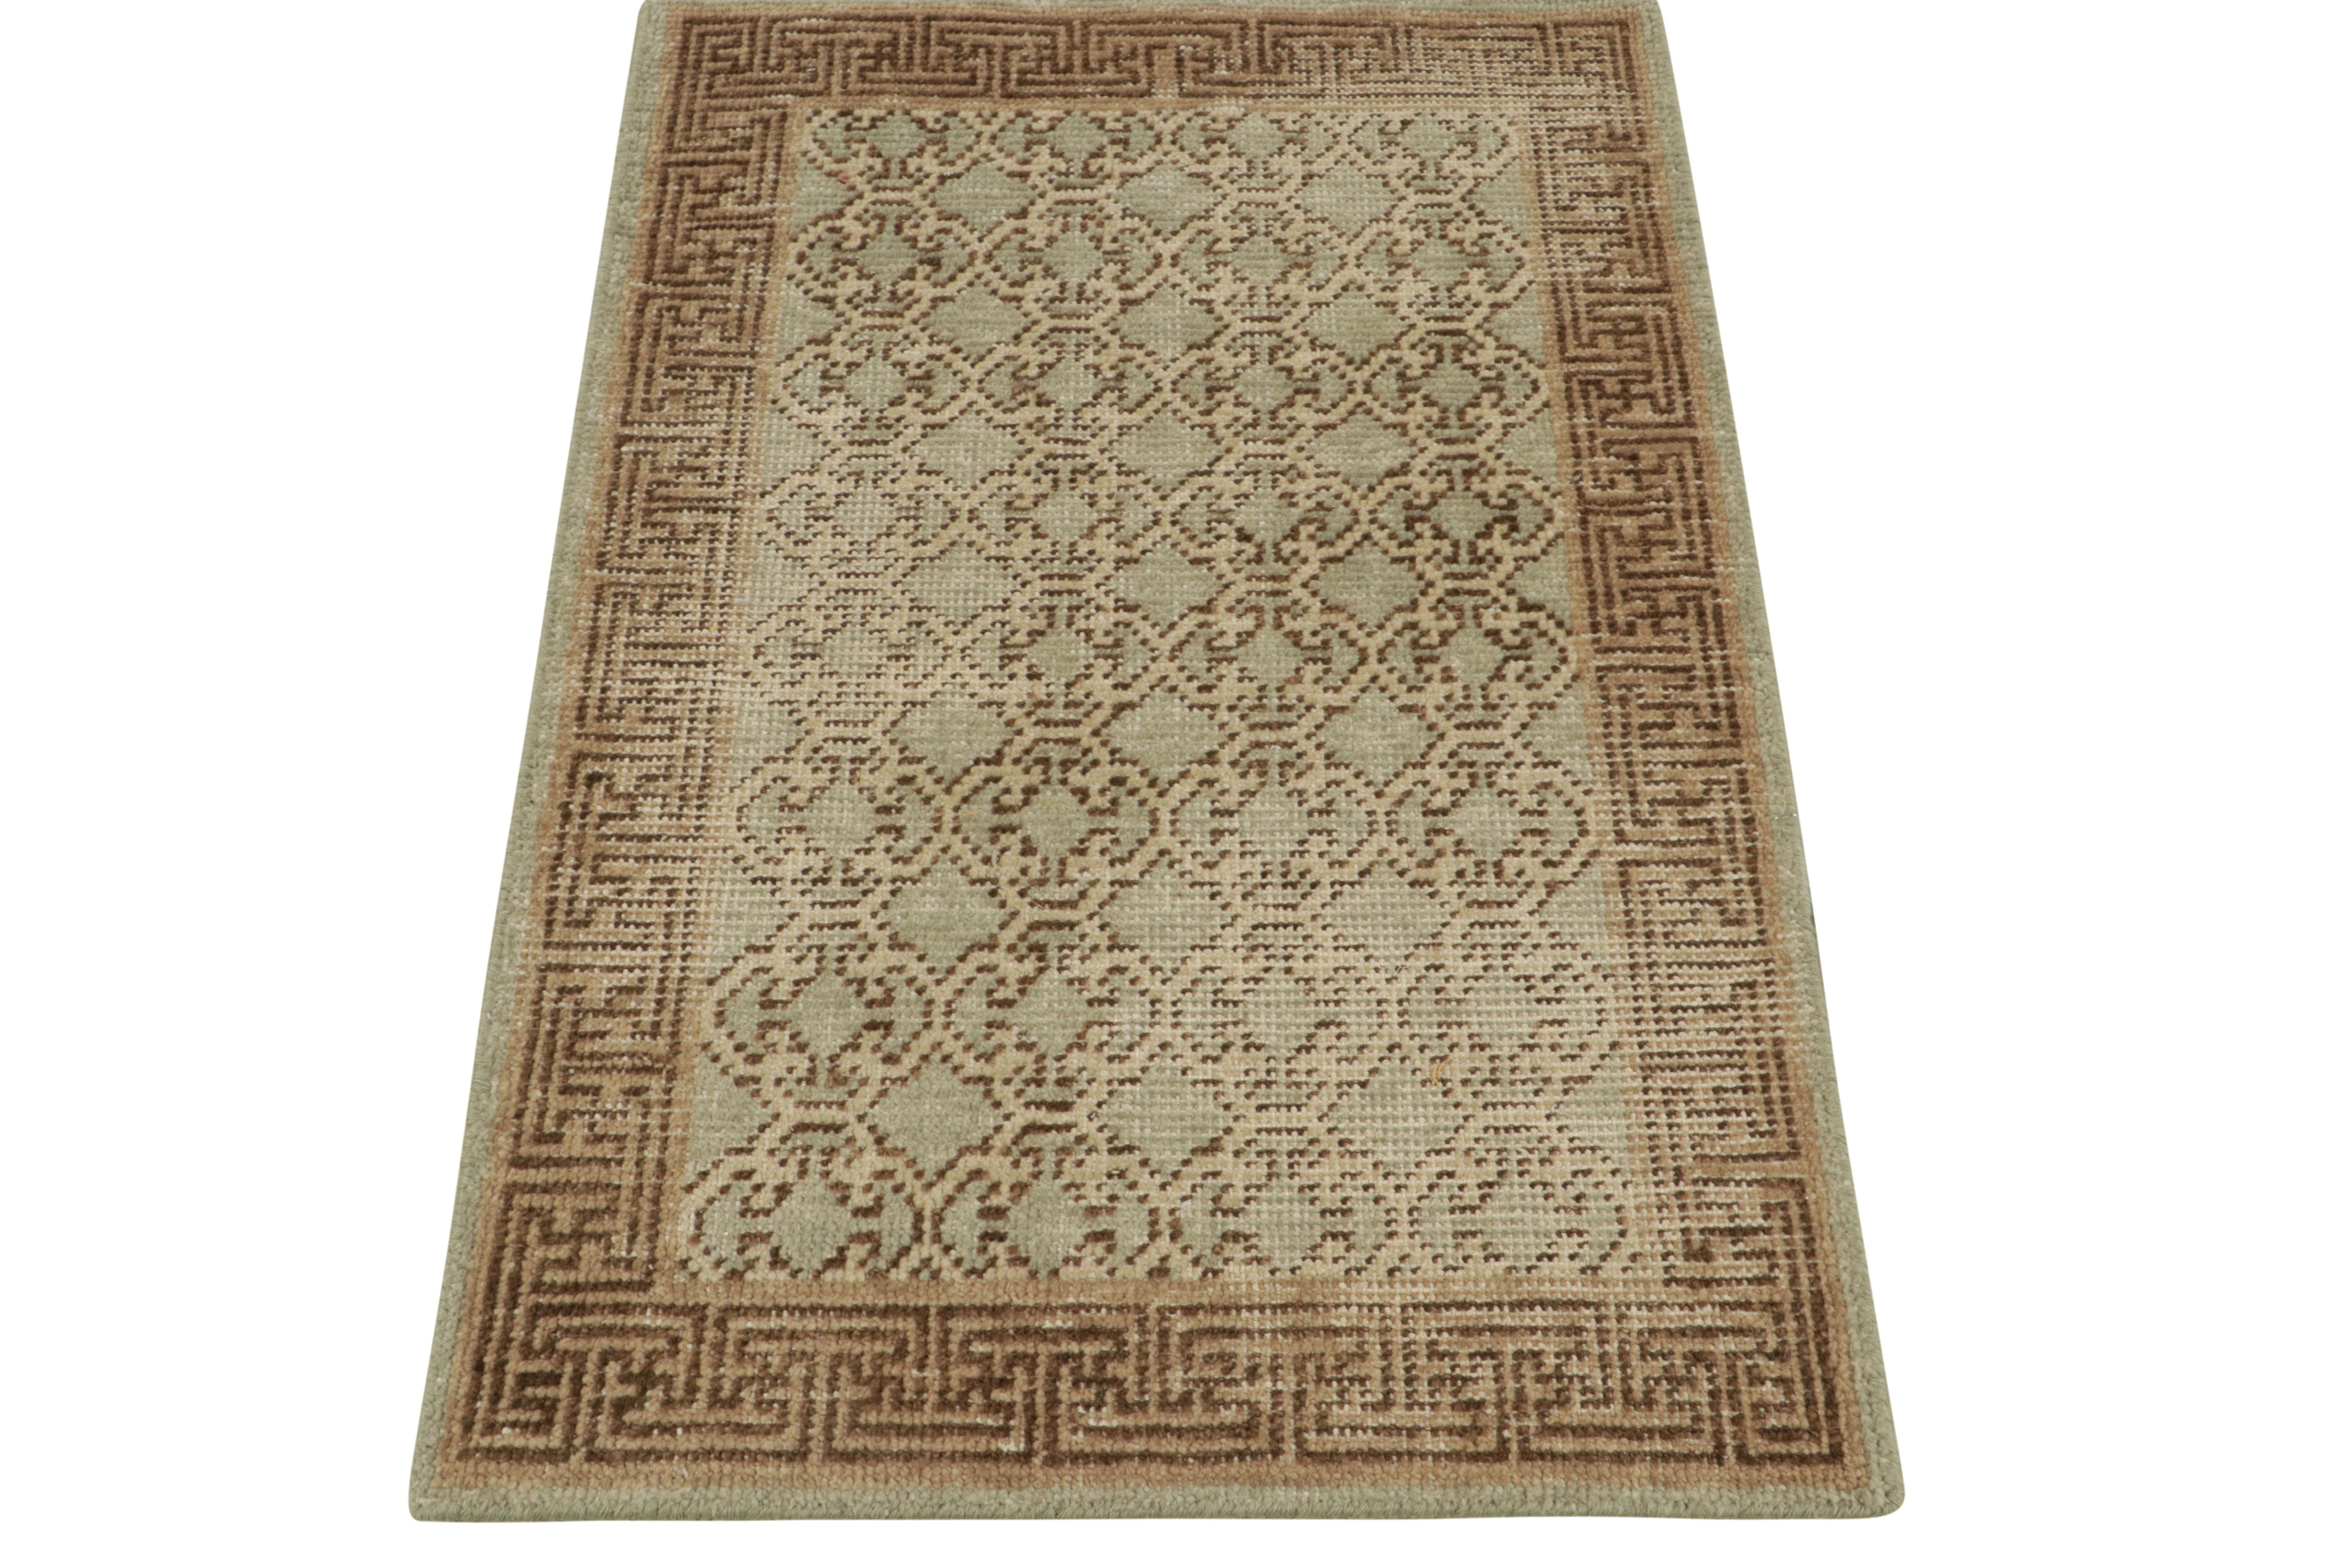 From Rug & Kilim’s Homage collection, a 2x3 hand-knotted accent rug enjoying a modern take on rustic classics. Inspired by antique Khotan rugs, this gift-sized scatter rug witnesses an interlocking fret pattern border and field trellis patterns on a